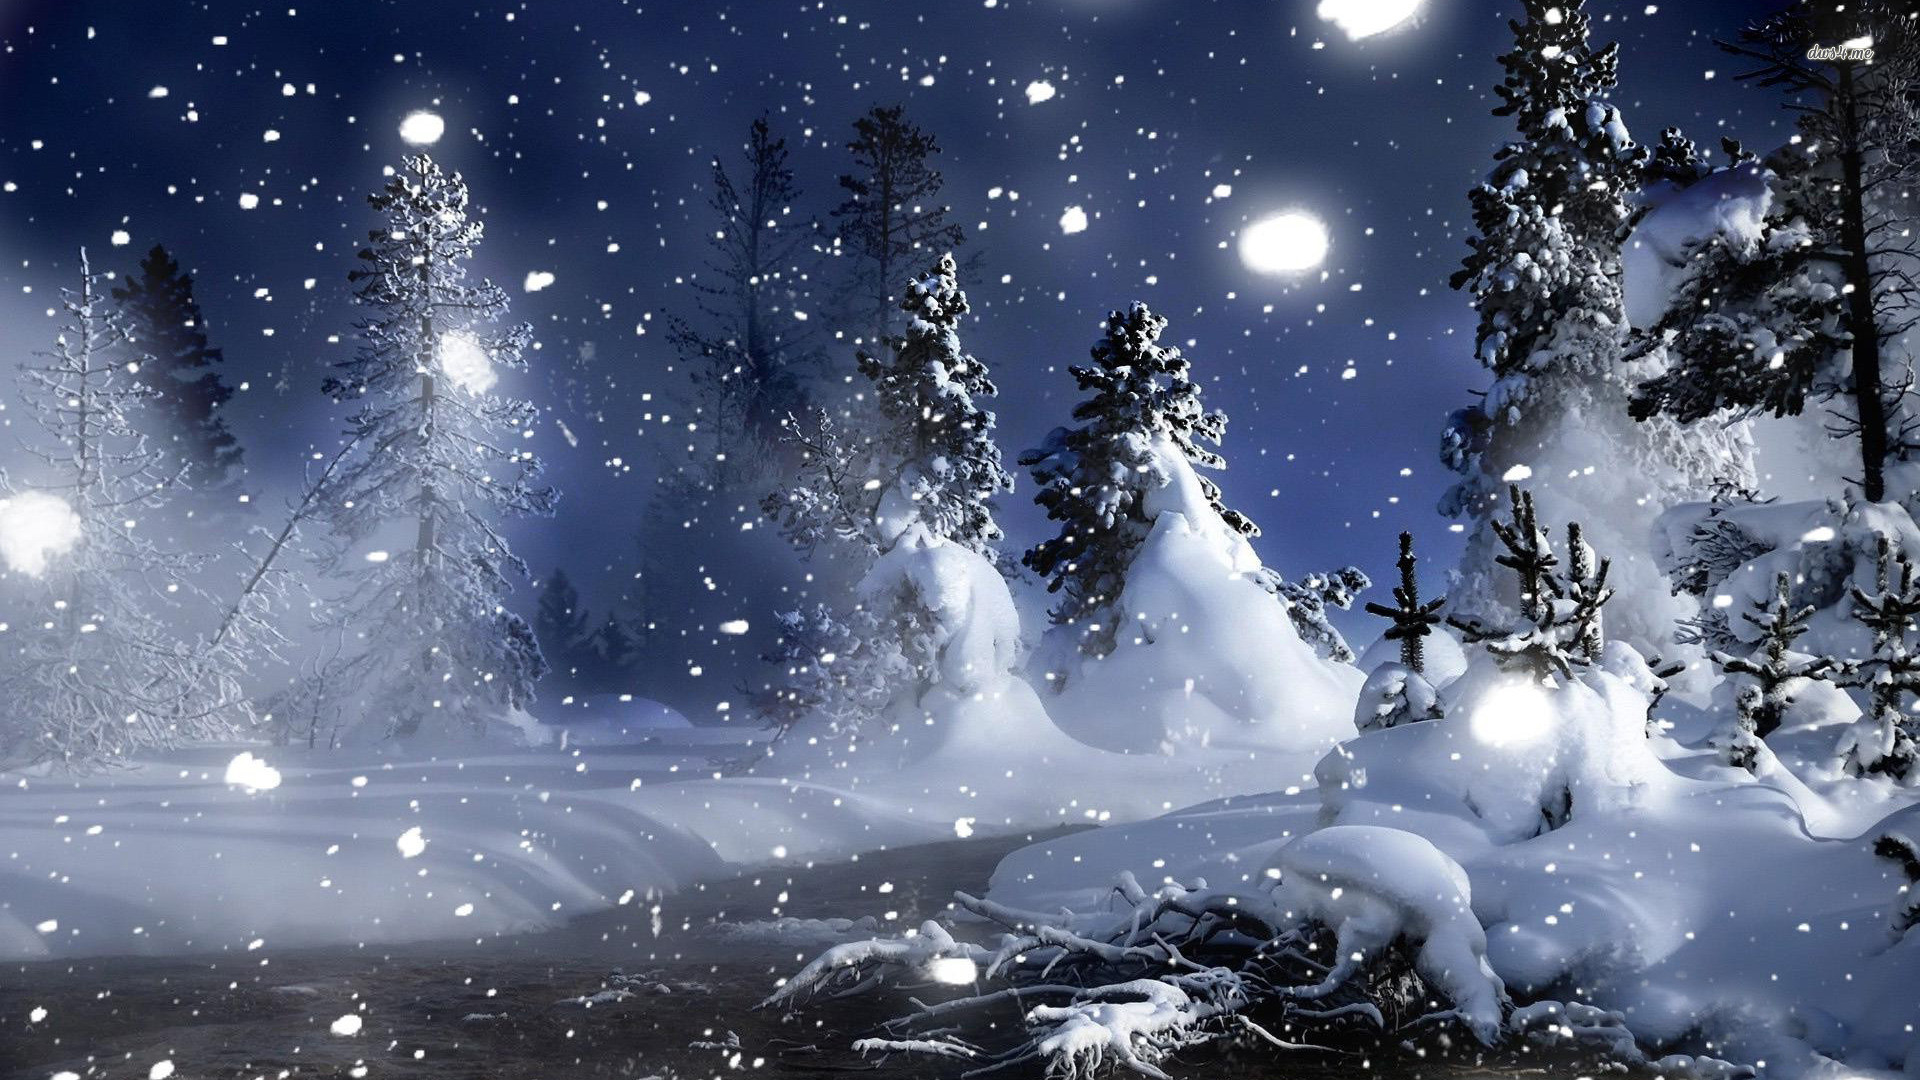 1920x1080 Snowy Night Android Wallpapers